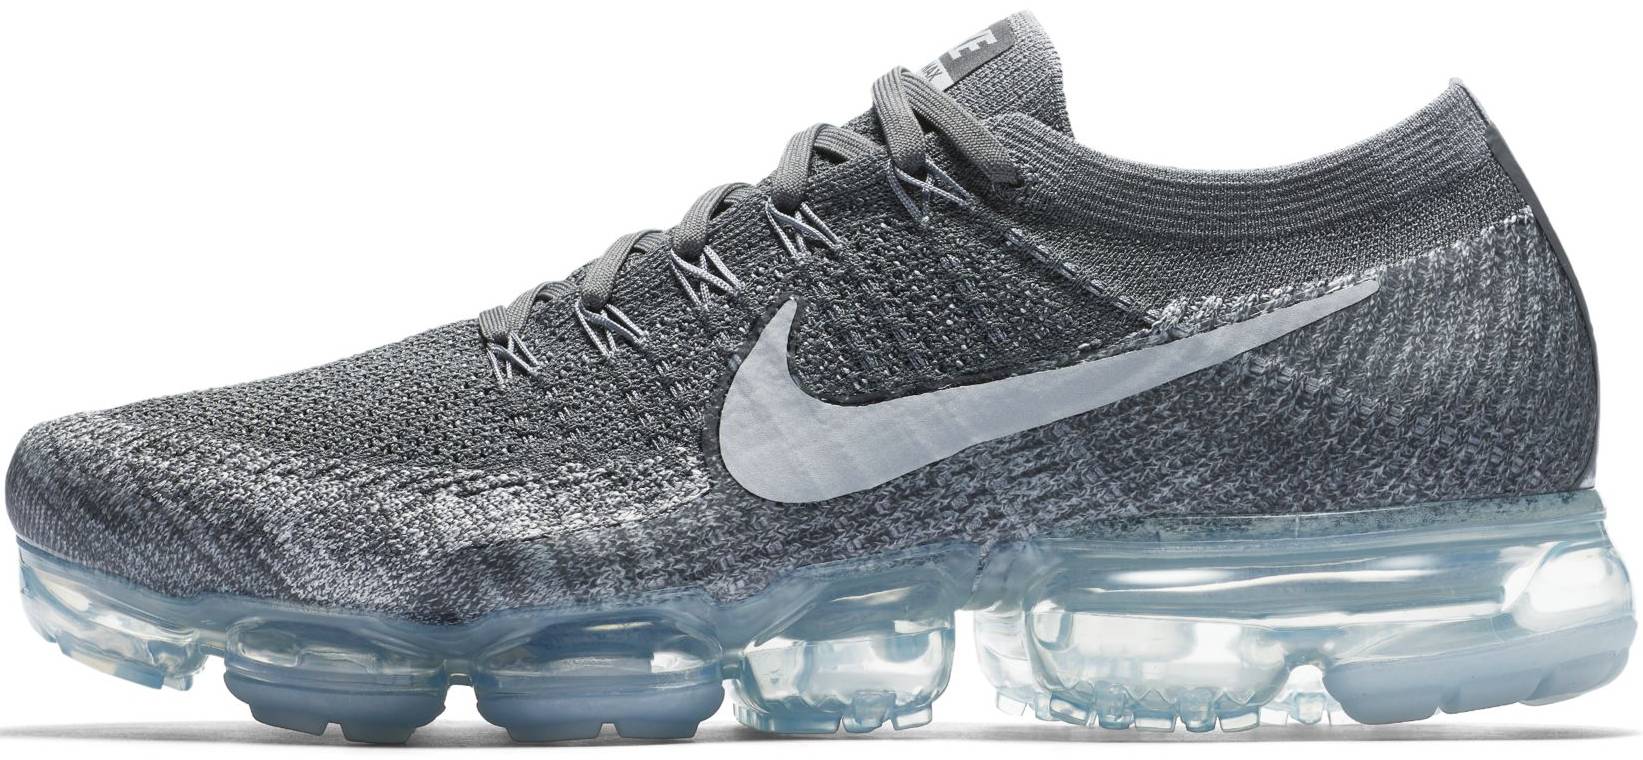 grey and black flyknit vapormax